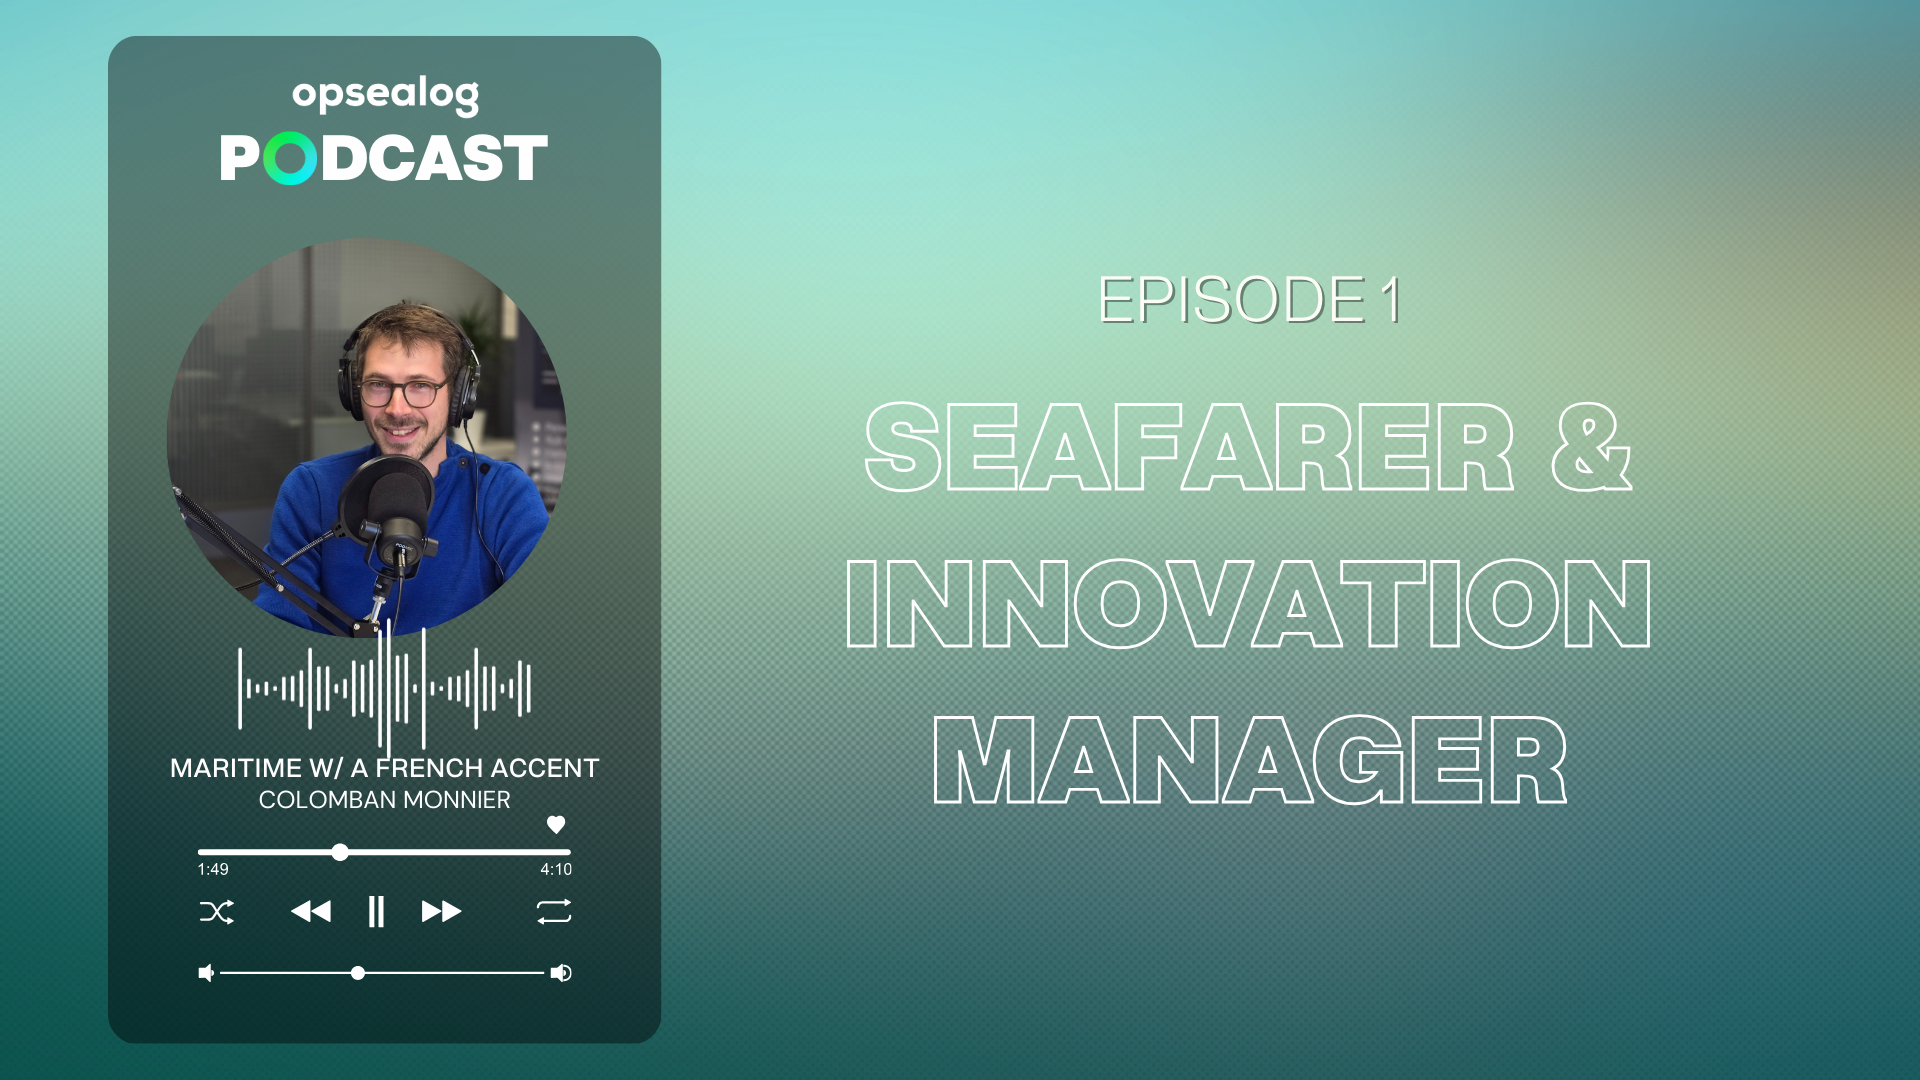 OpsealogPodcast_Maritime_with_a_franch_accent_EP1